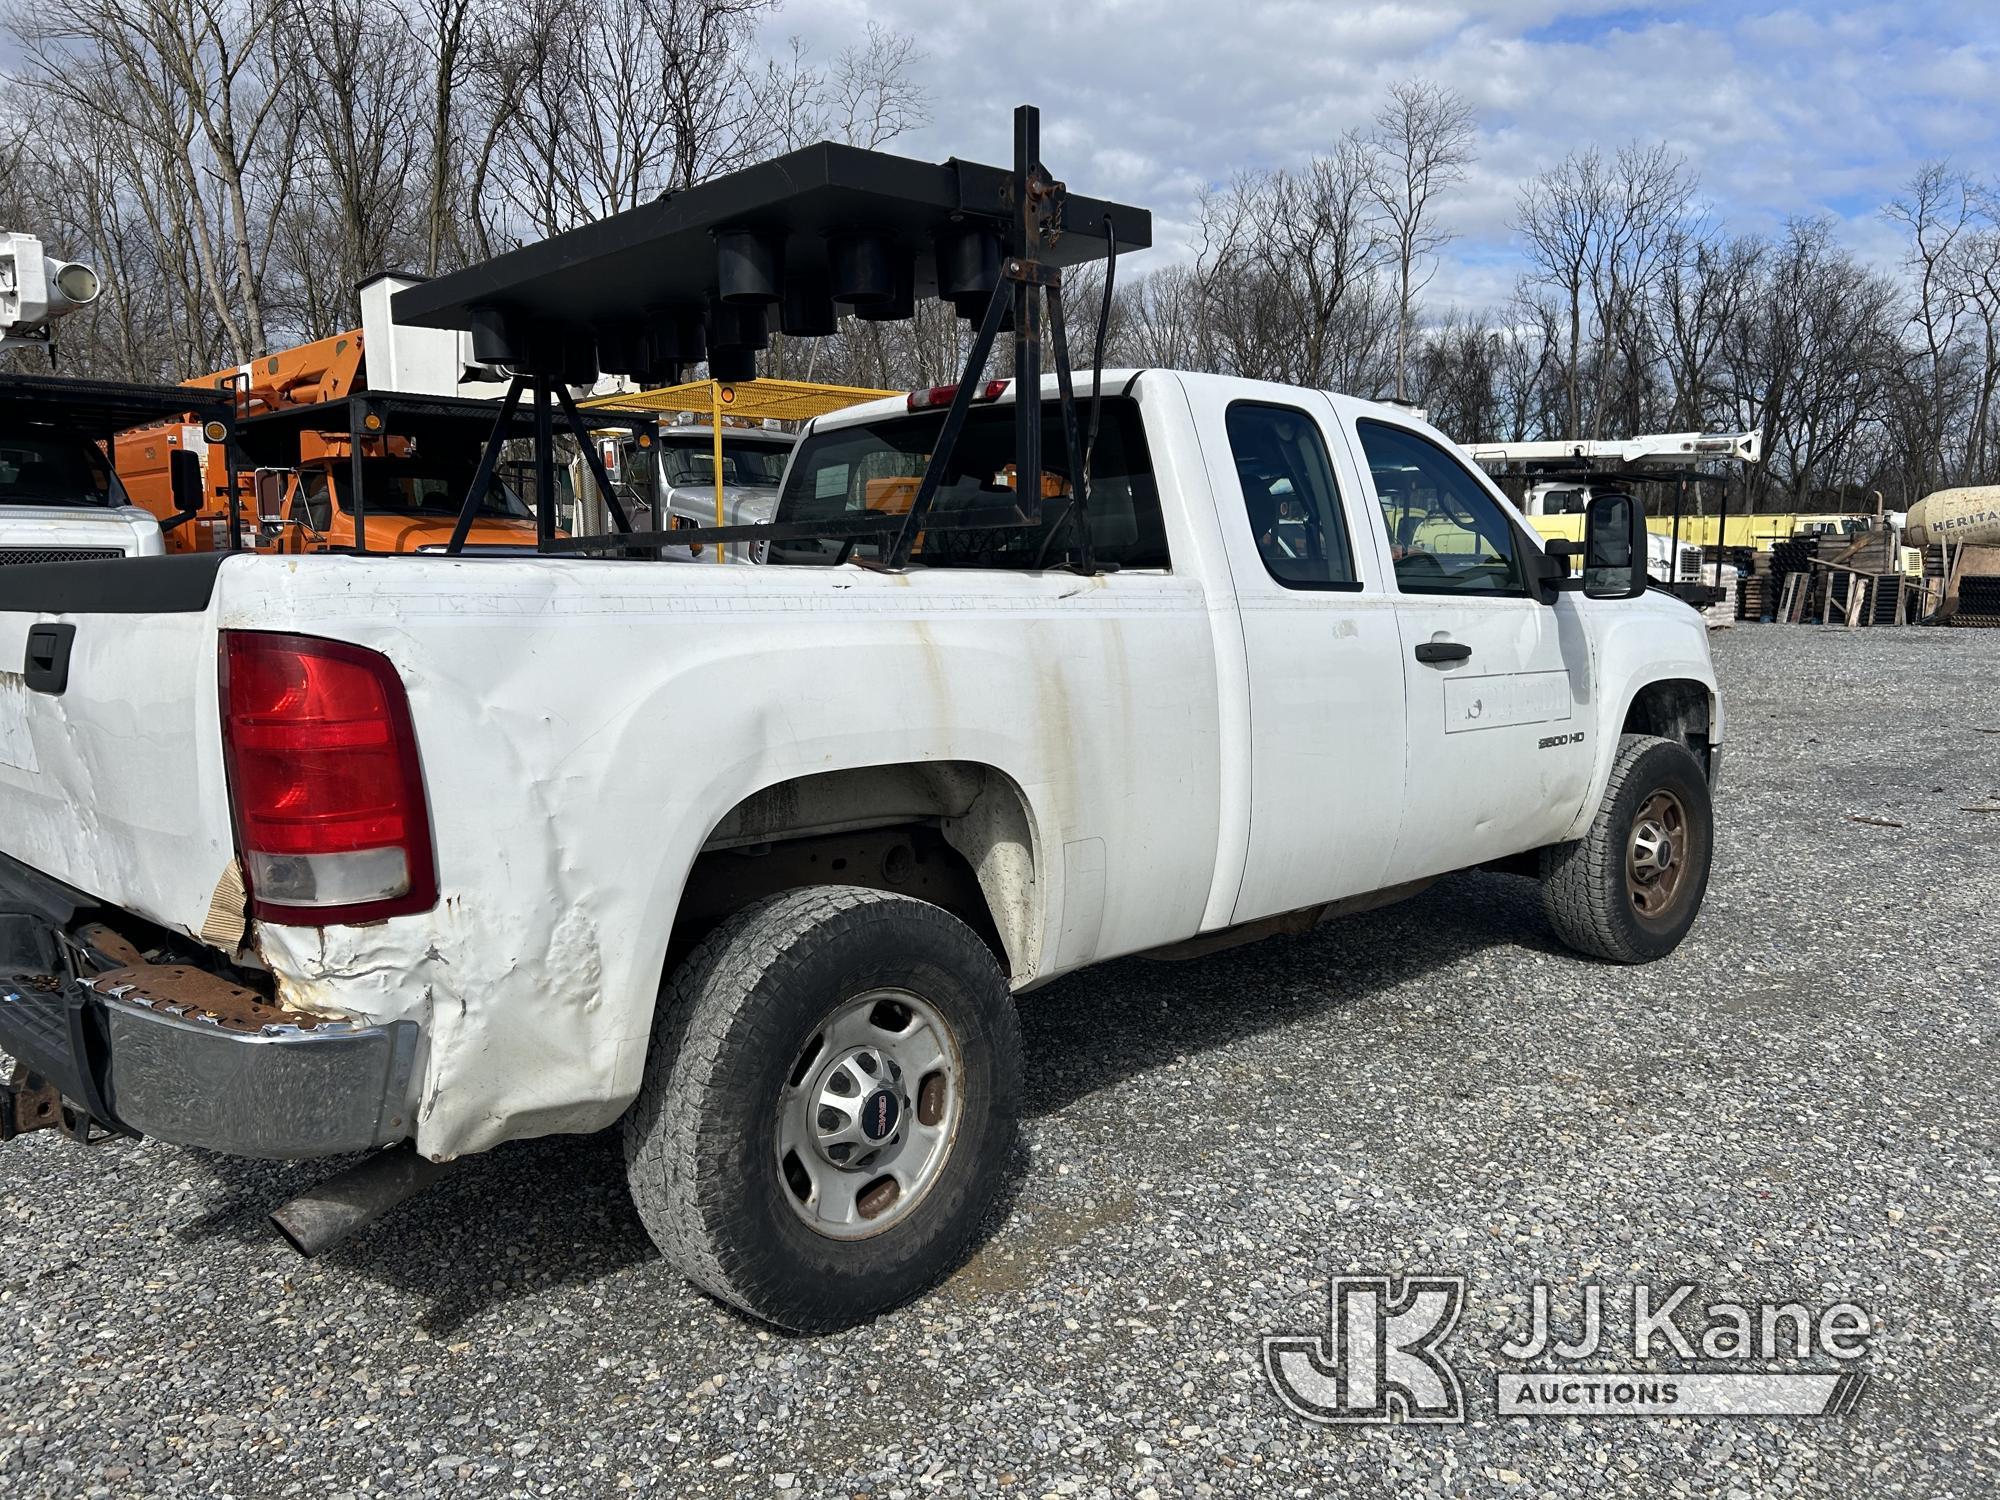 (Hagerstown, MD) 2011 GMC Sierra 2500 4x4 Extended-Cab Pickup Truck Runs & Moves, Jump To Start, Win